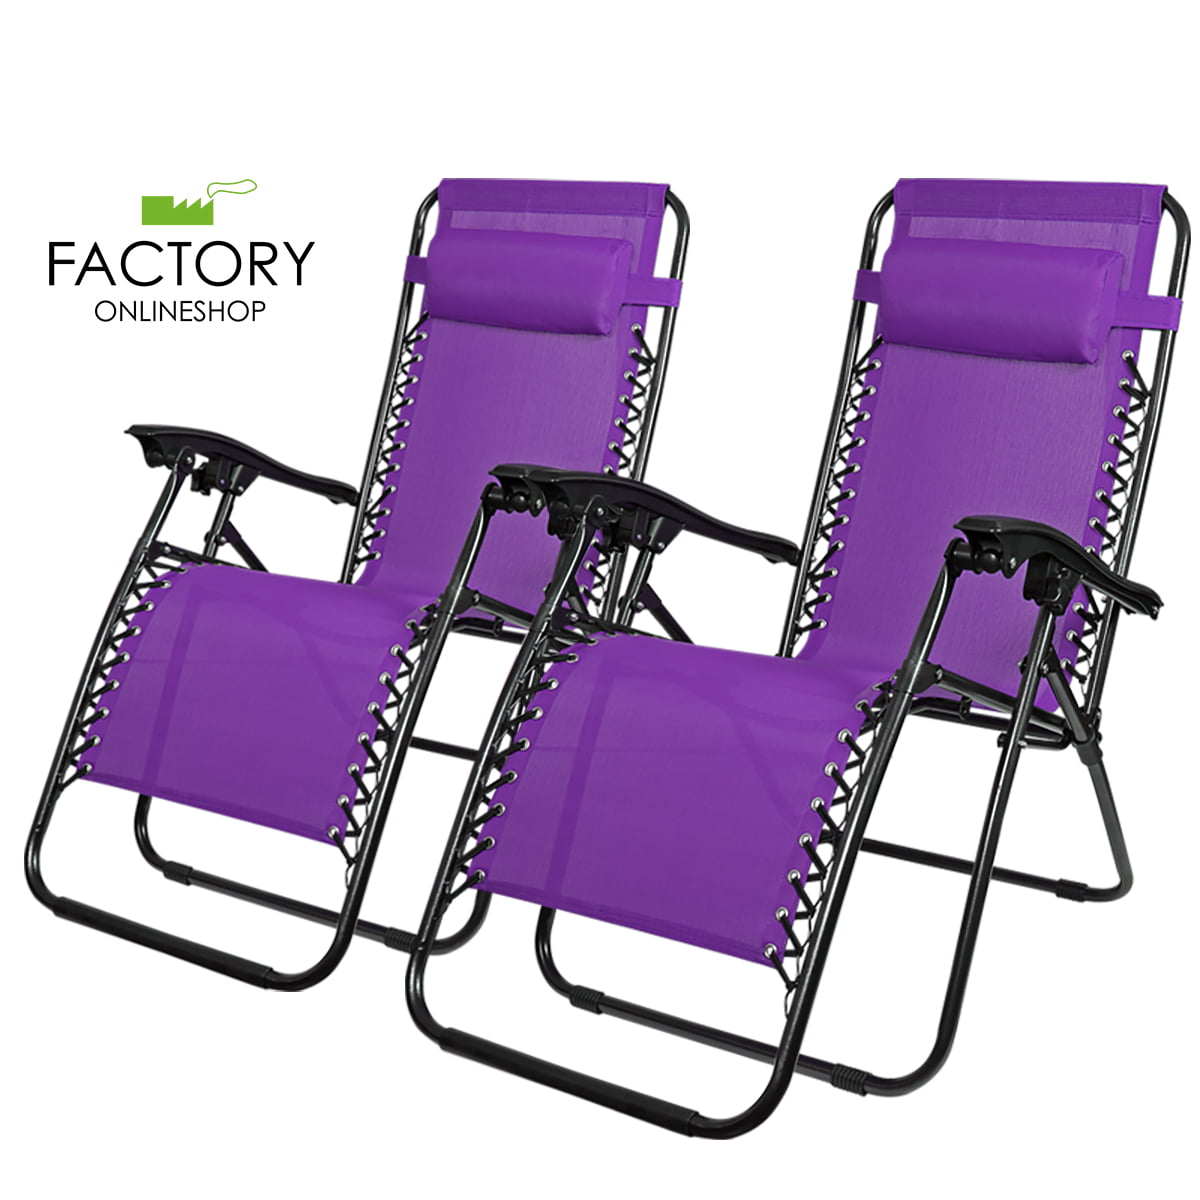 ZLGE Patio Zero Gravity Chairs Sunbed Relaxer Recliner Chairs Folding Chair Recliners Household Lunch Break Computer Chair Casual Siesta Office Balcony Beach Purple Blue Gray Folding Lounge Chair